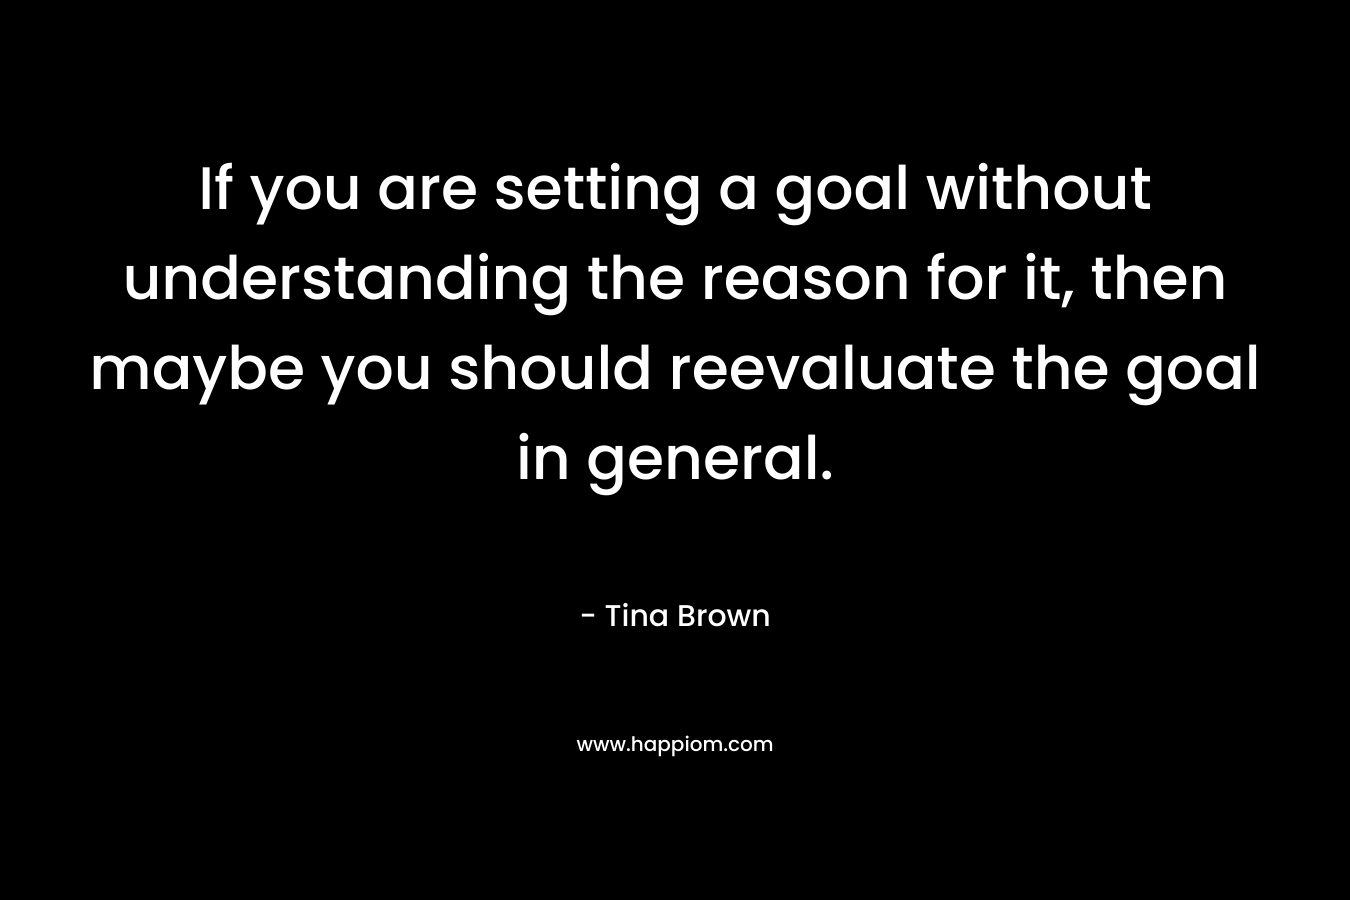 If you are setting a goal without understanding the reason for it, then maybe you should reevaluate the goal in general.